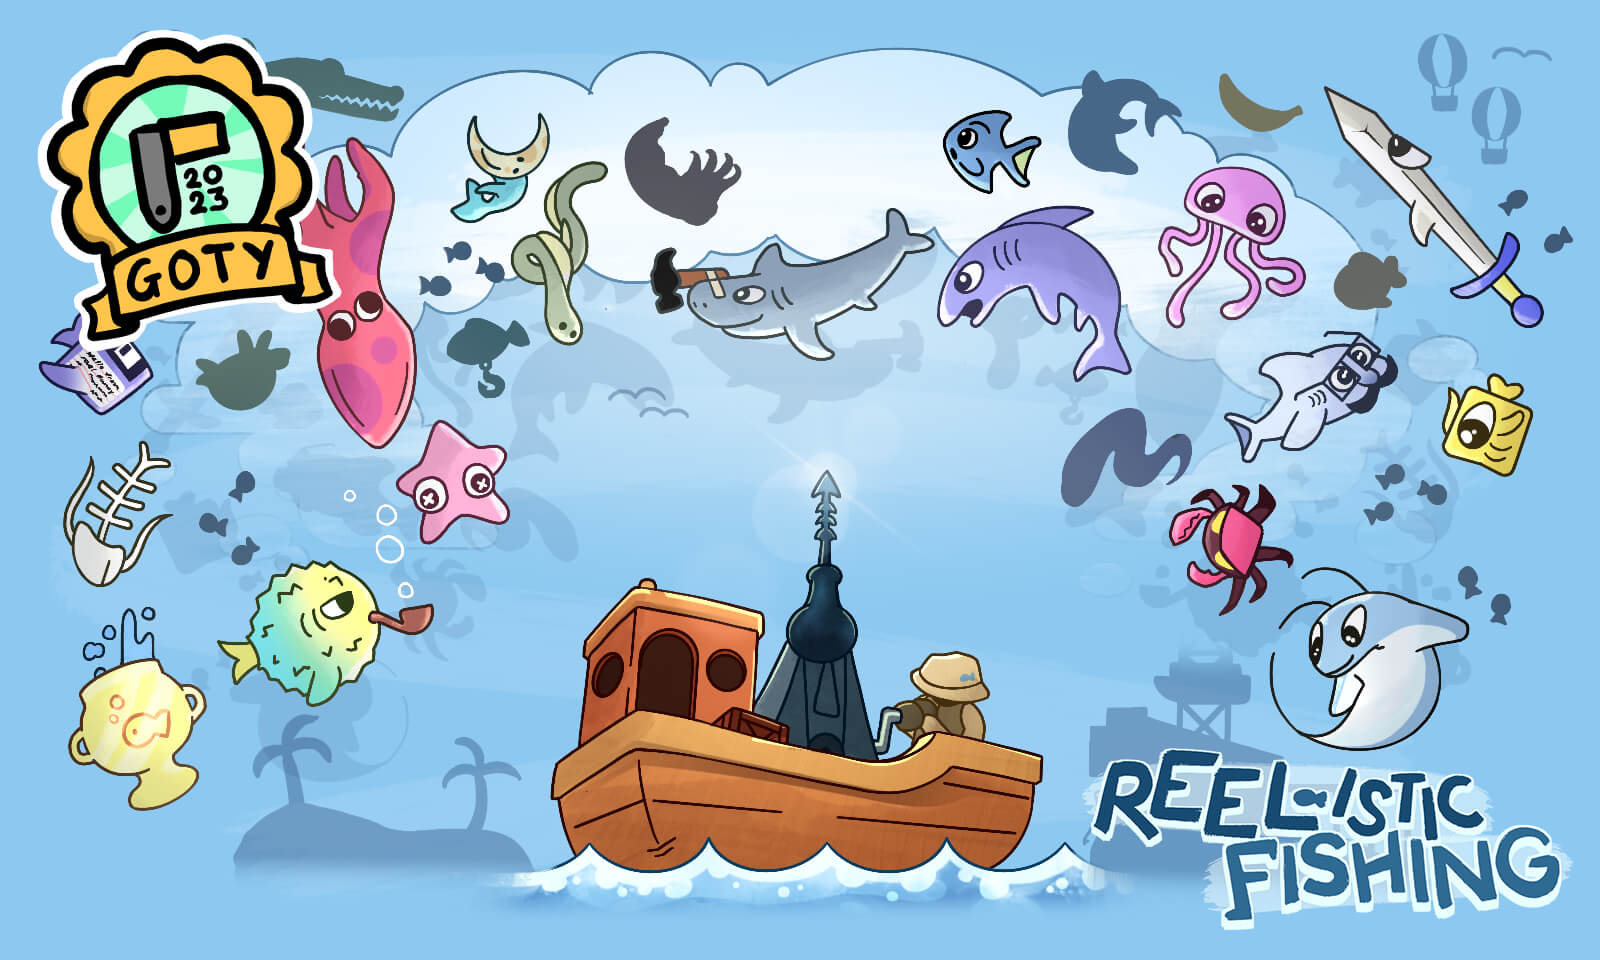 Illustration from the Playdate game Reel-istic Fishing. Text: Reel-istic Fishing was awarded 2023 Game of the Year in the Playdate Community Awards.